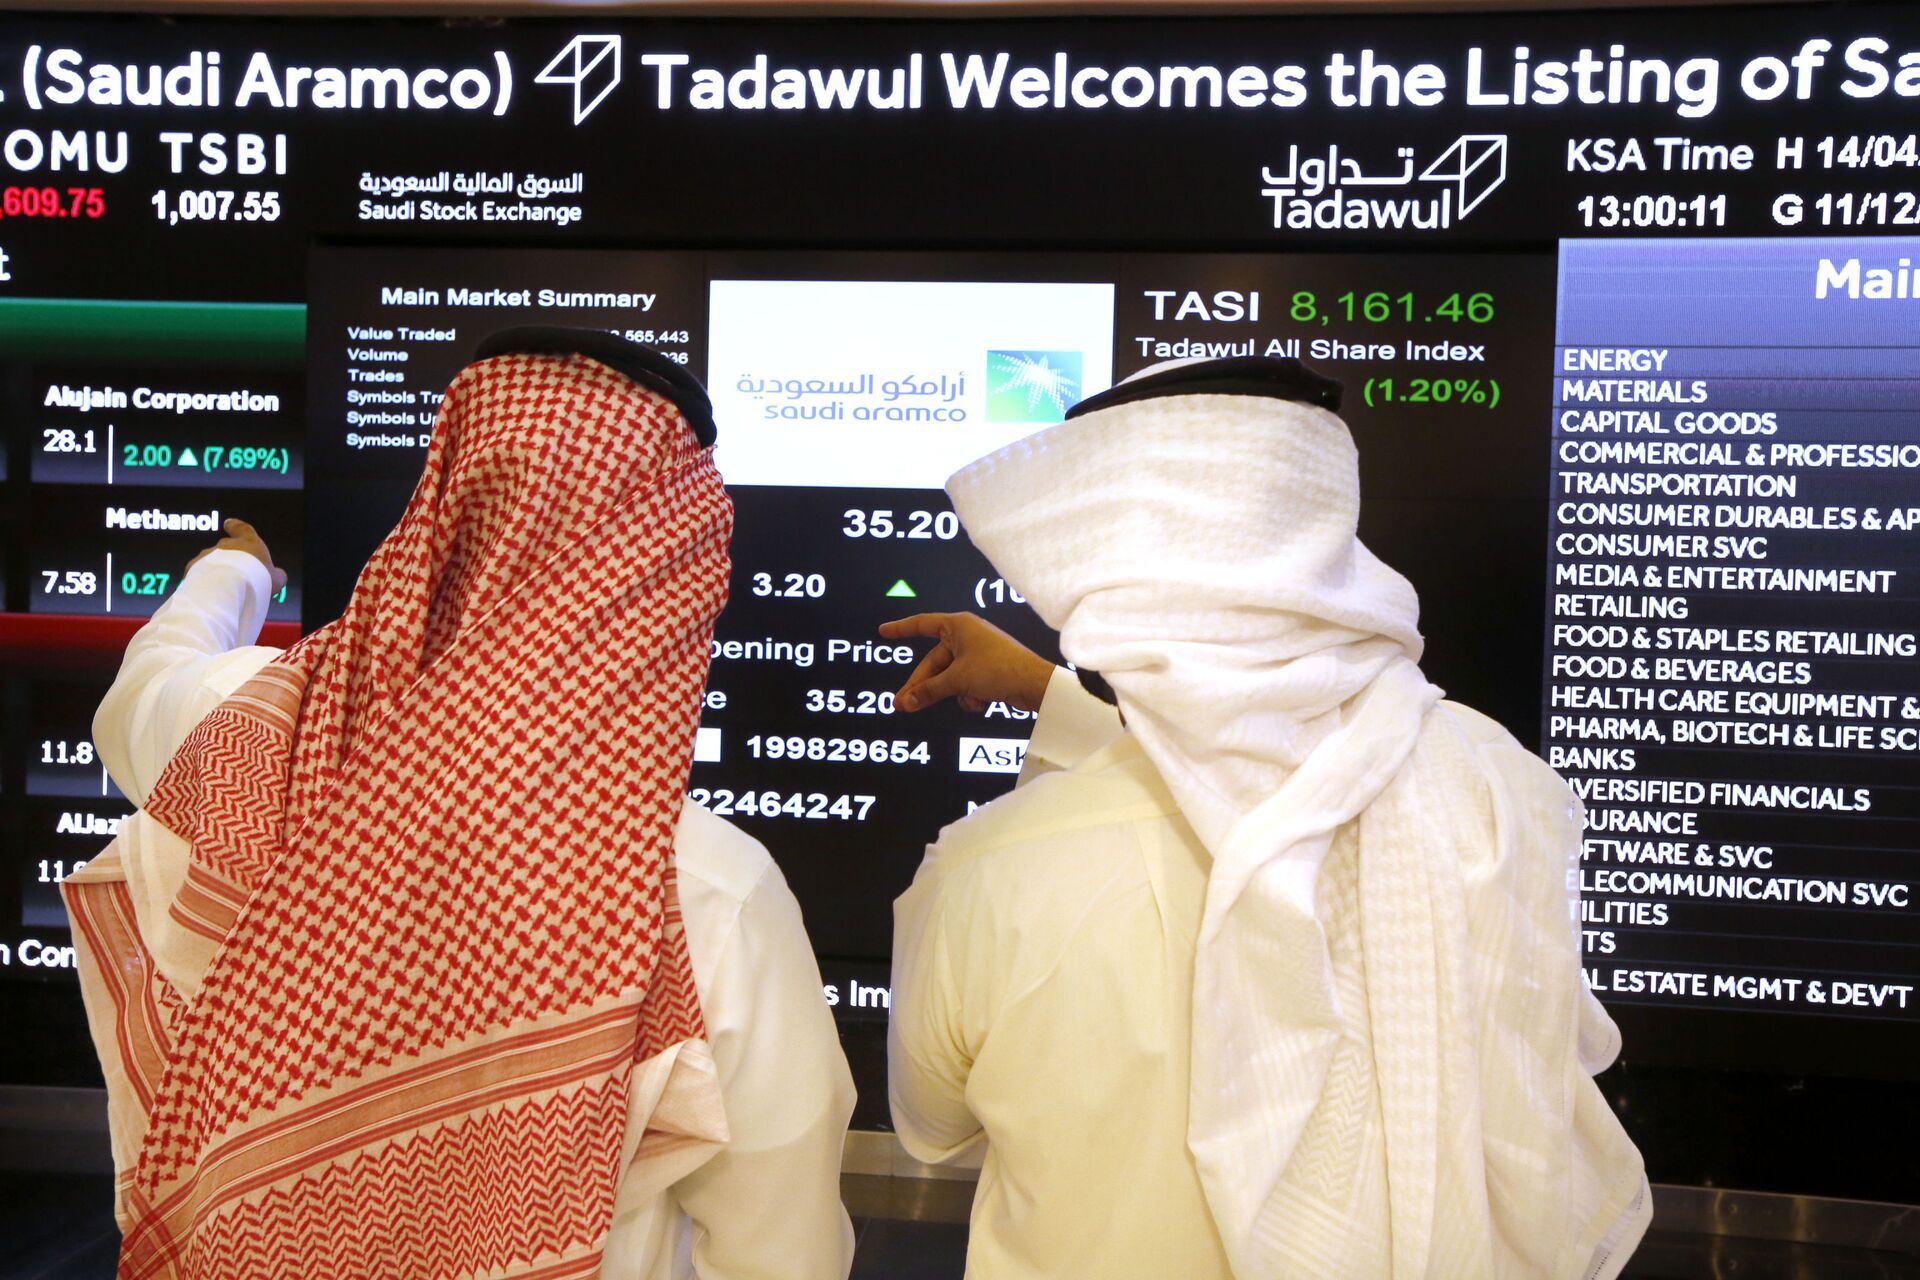 Saudi stock market officials watch the market screen displaying Saudi Arabia's state-owned oil company Aramco after the debut of Aramco's initial public offering (IPO) on the Riyadh's stock market in Riyadh, Saudi Arabia, Wednesday, Dec. 11, 2019 - Sputnik International, 1920, 01.04.2022